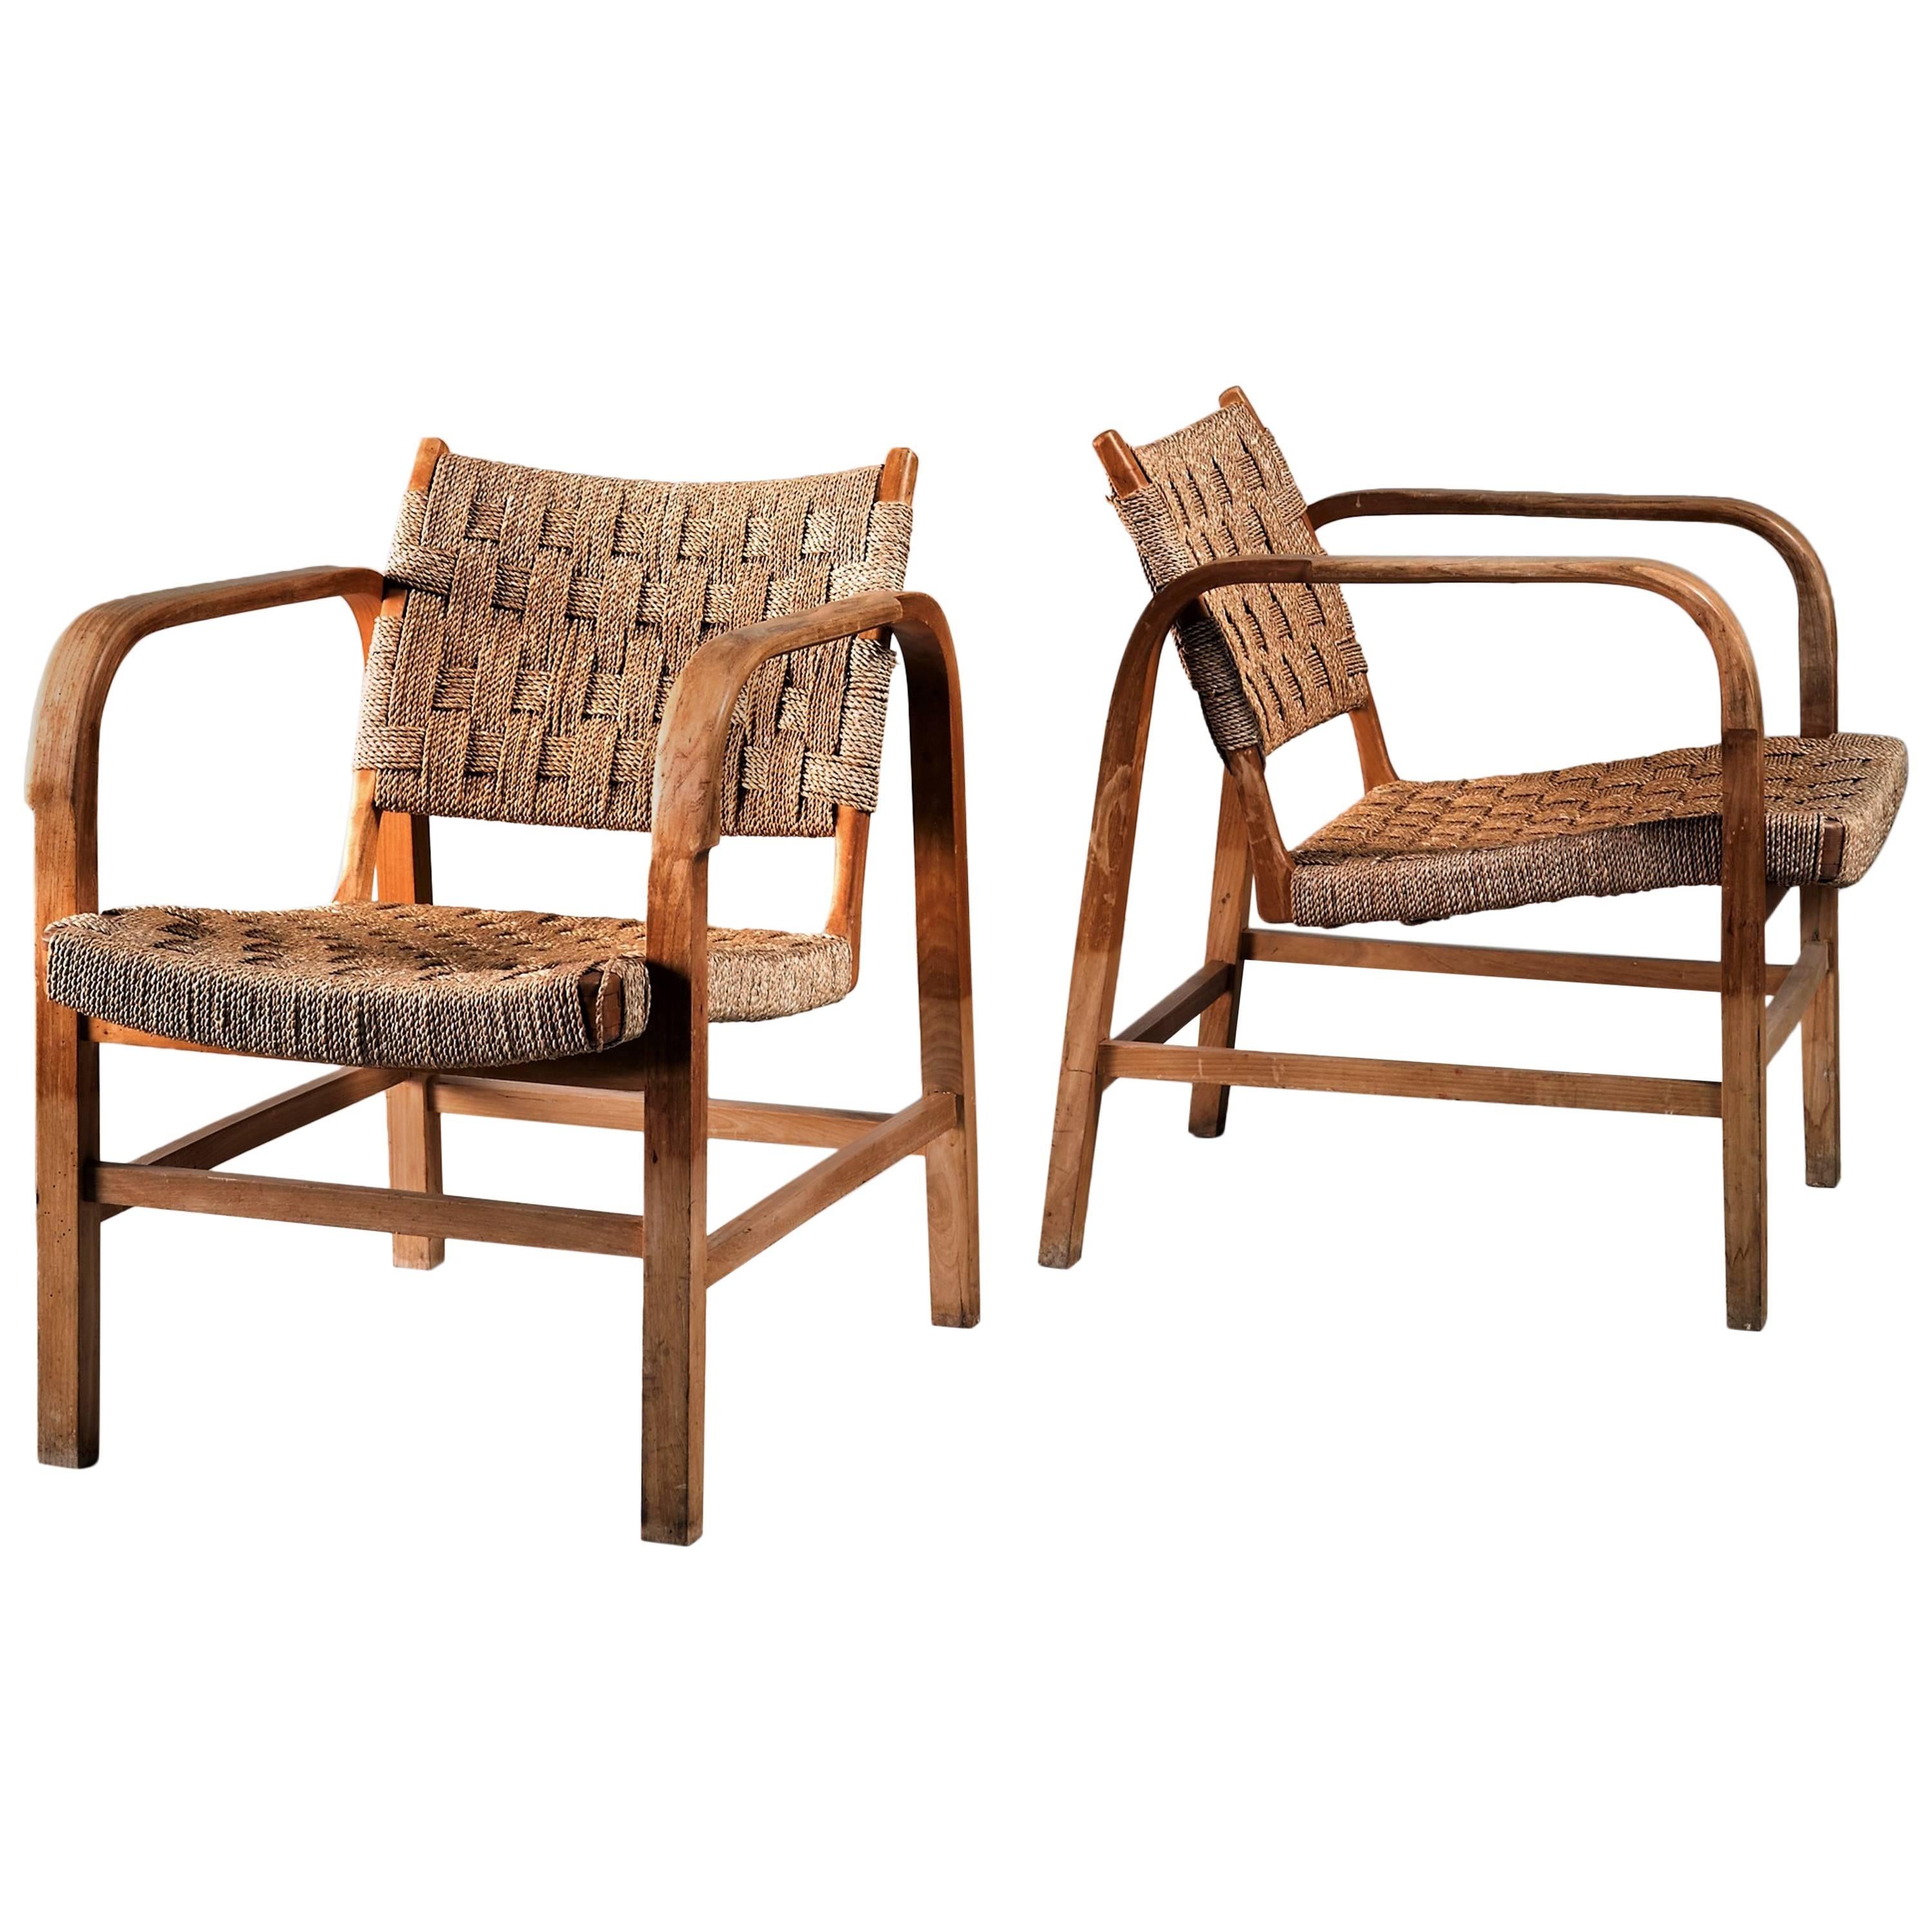 Magnus Stephensen Pair of Bent Beech and Seagrass Armchairs, Denmark, 1930s For Sale